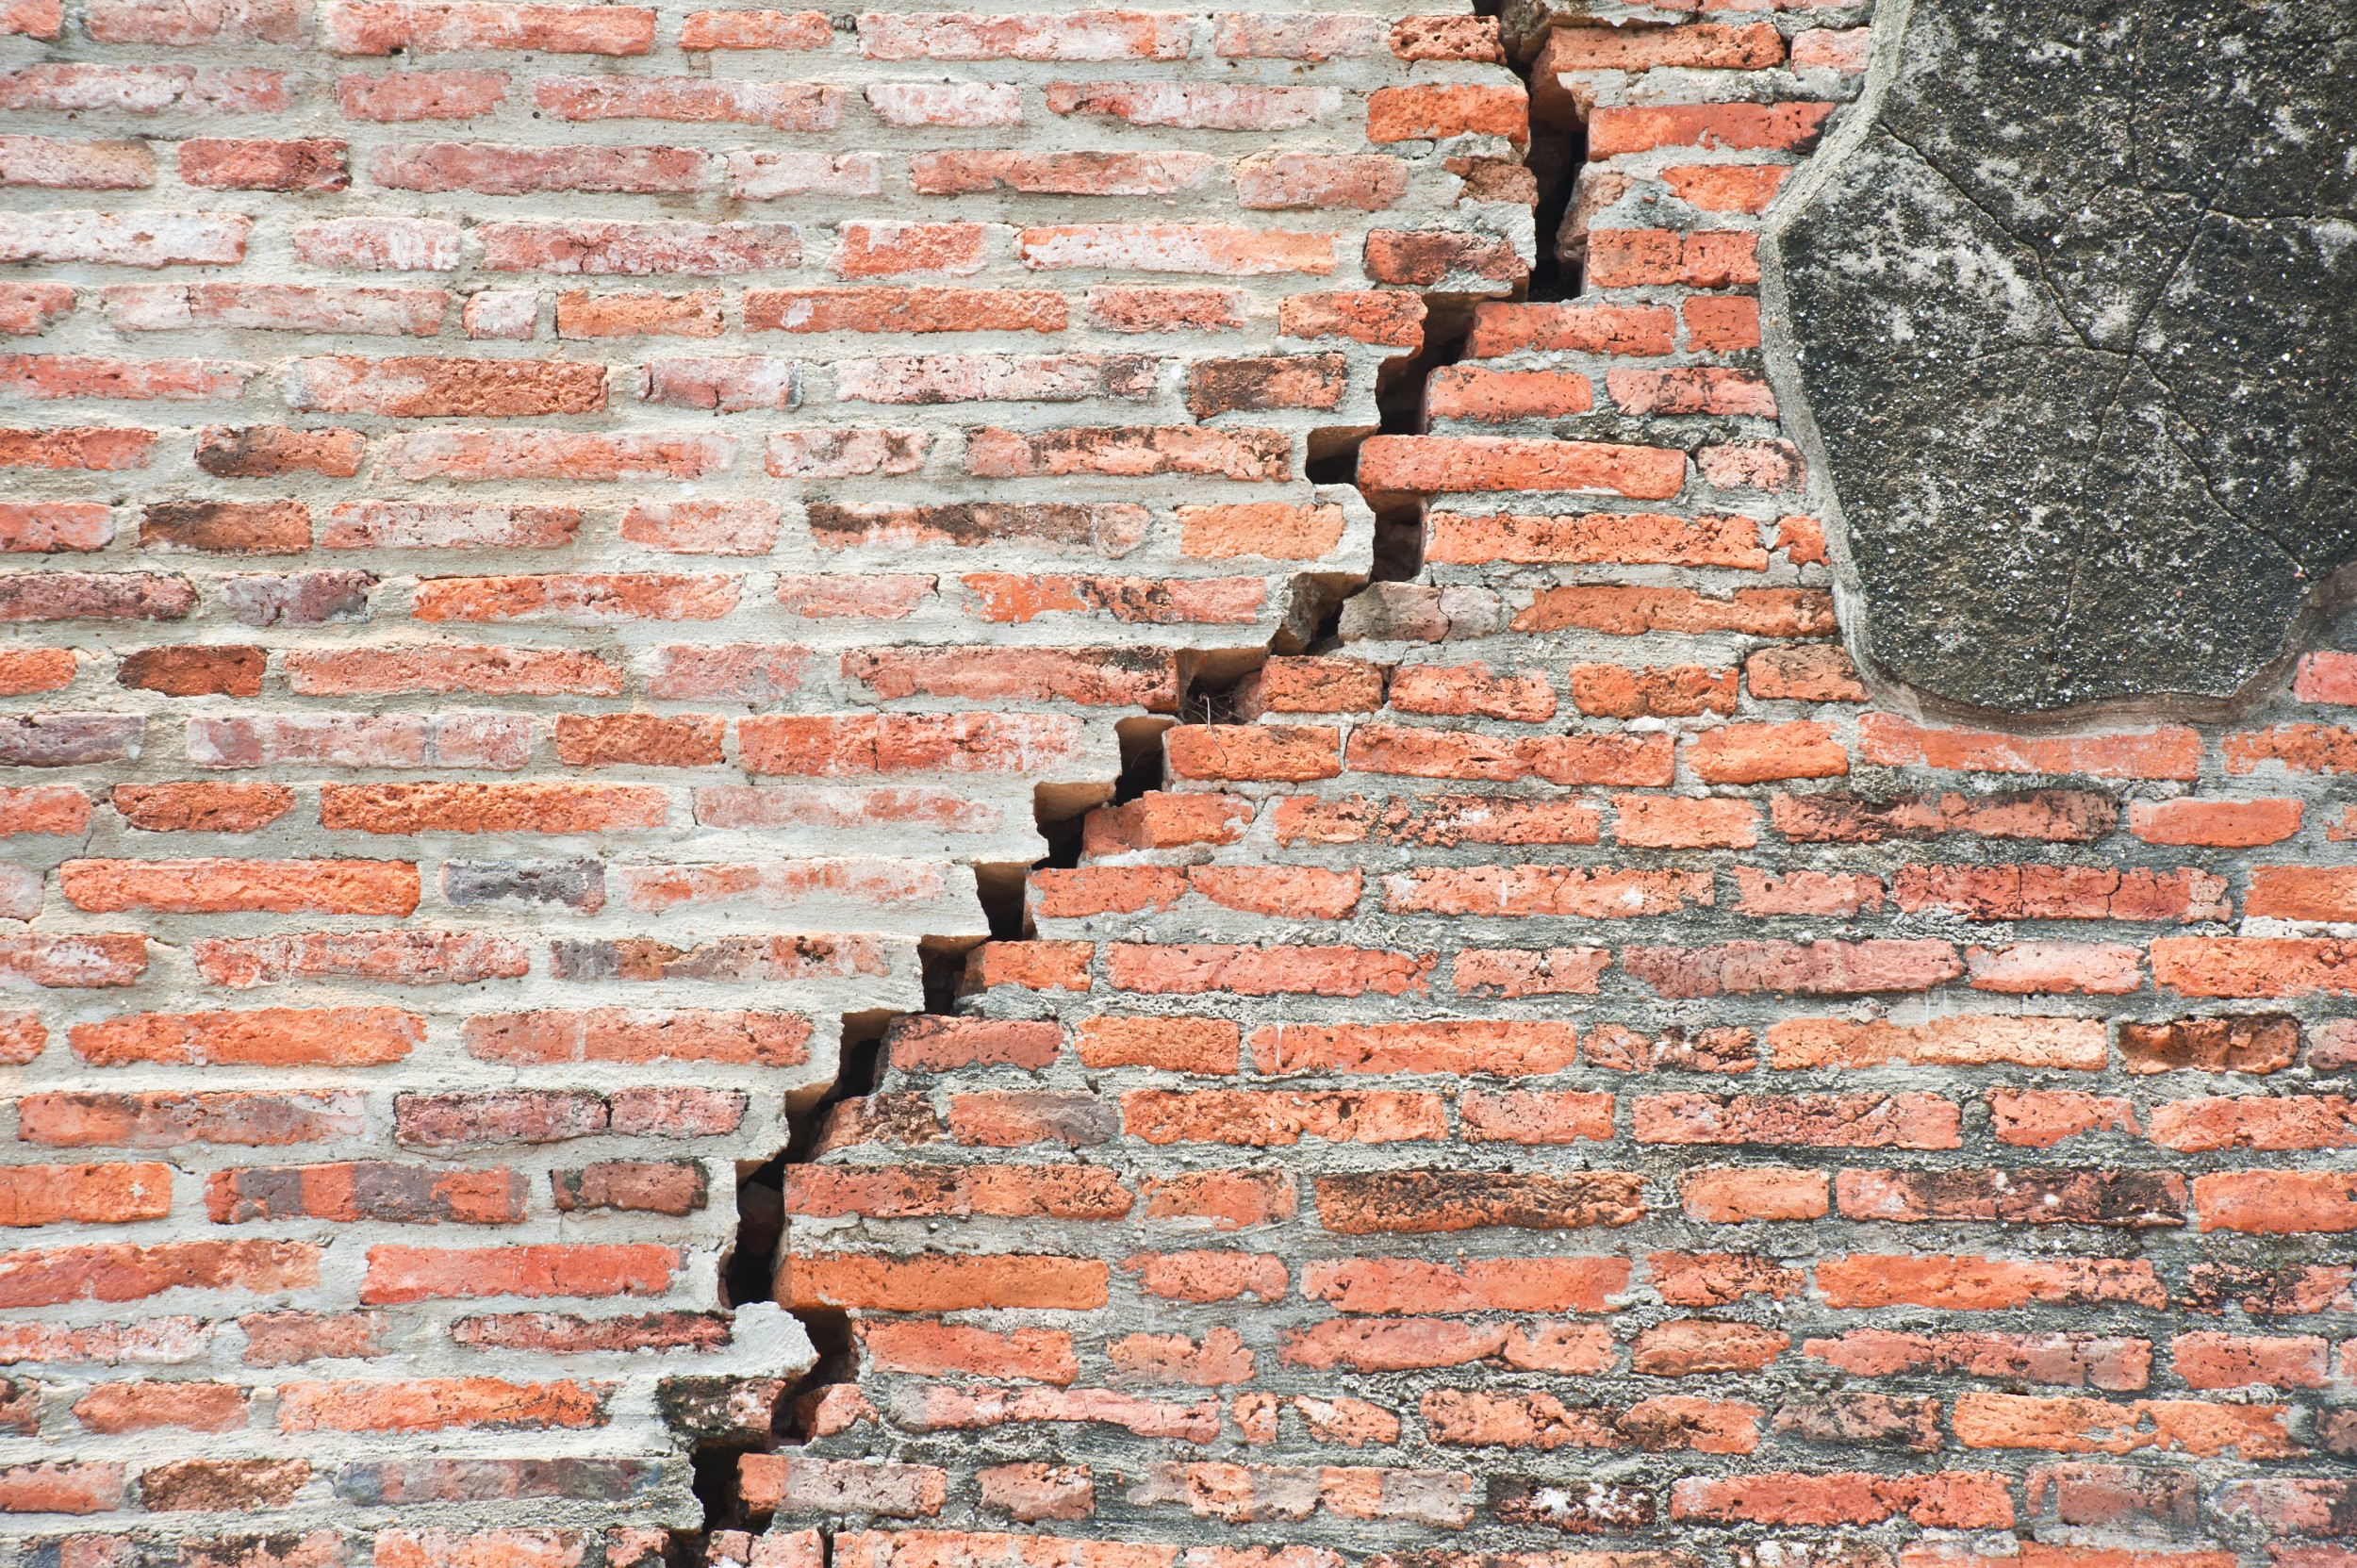 Damage such as cracks in walls should not occur – even if  geothermal drilling is carried out nearby.